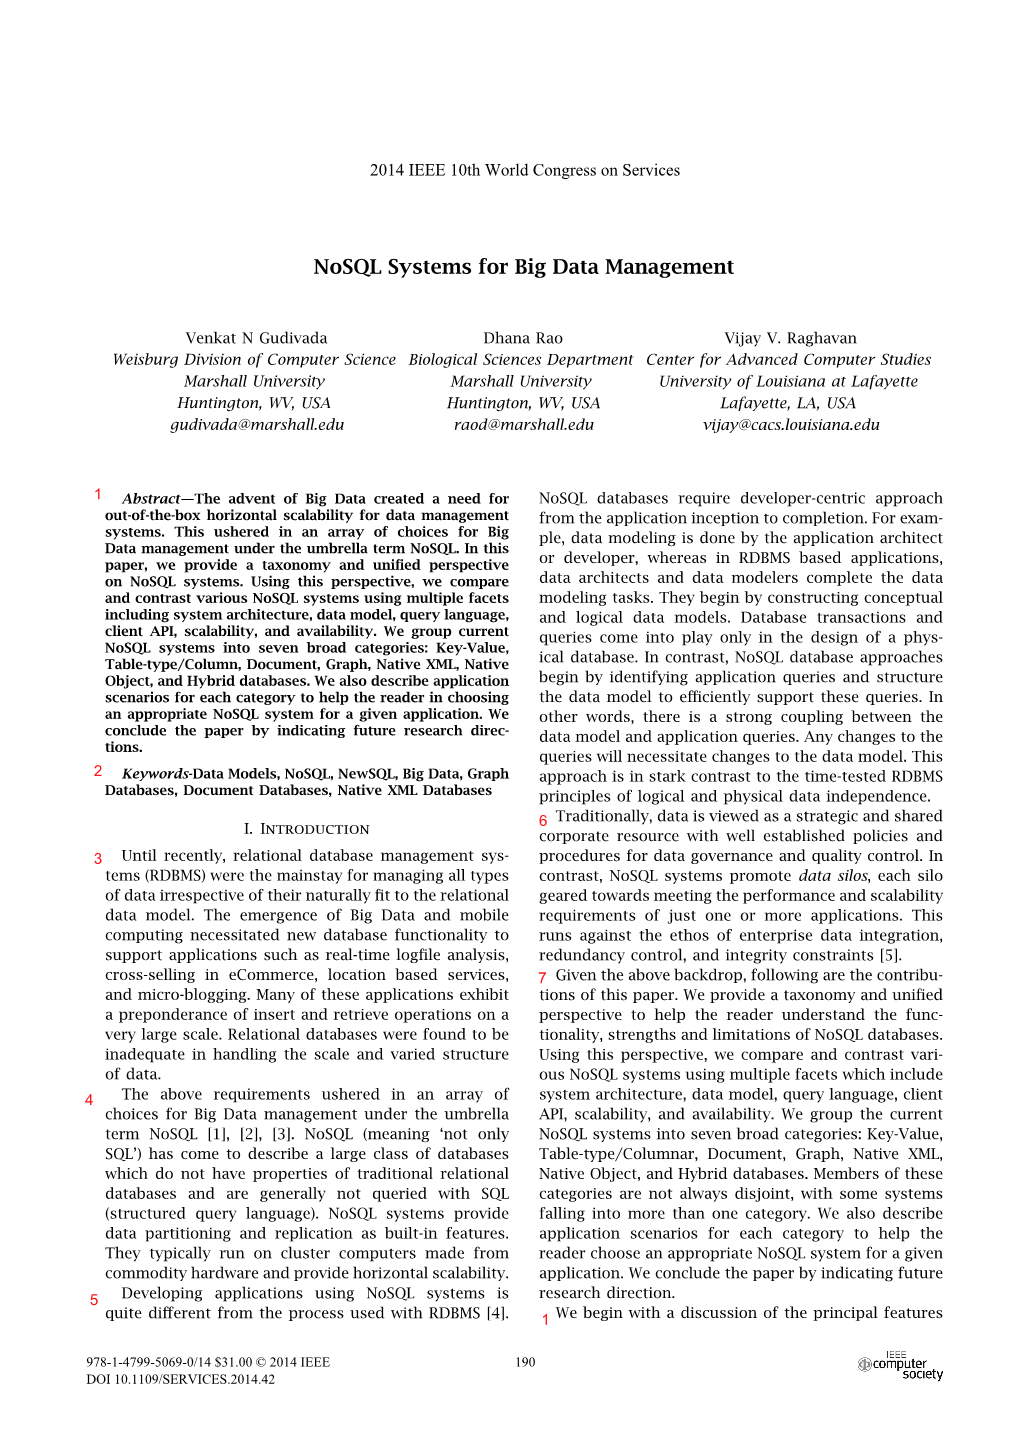 Nosql Systems for Big Data Management